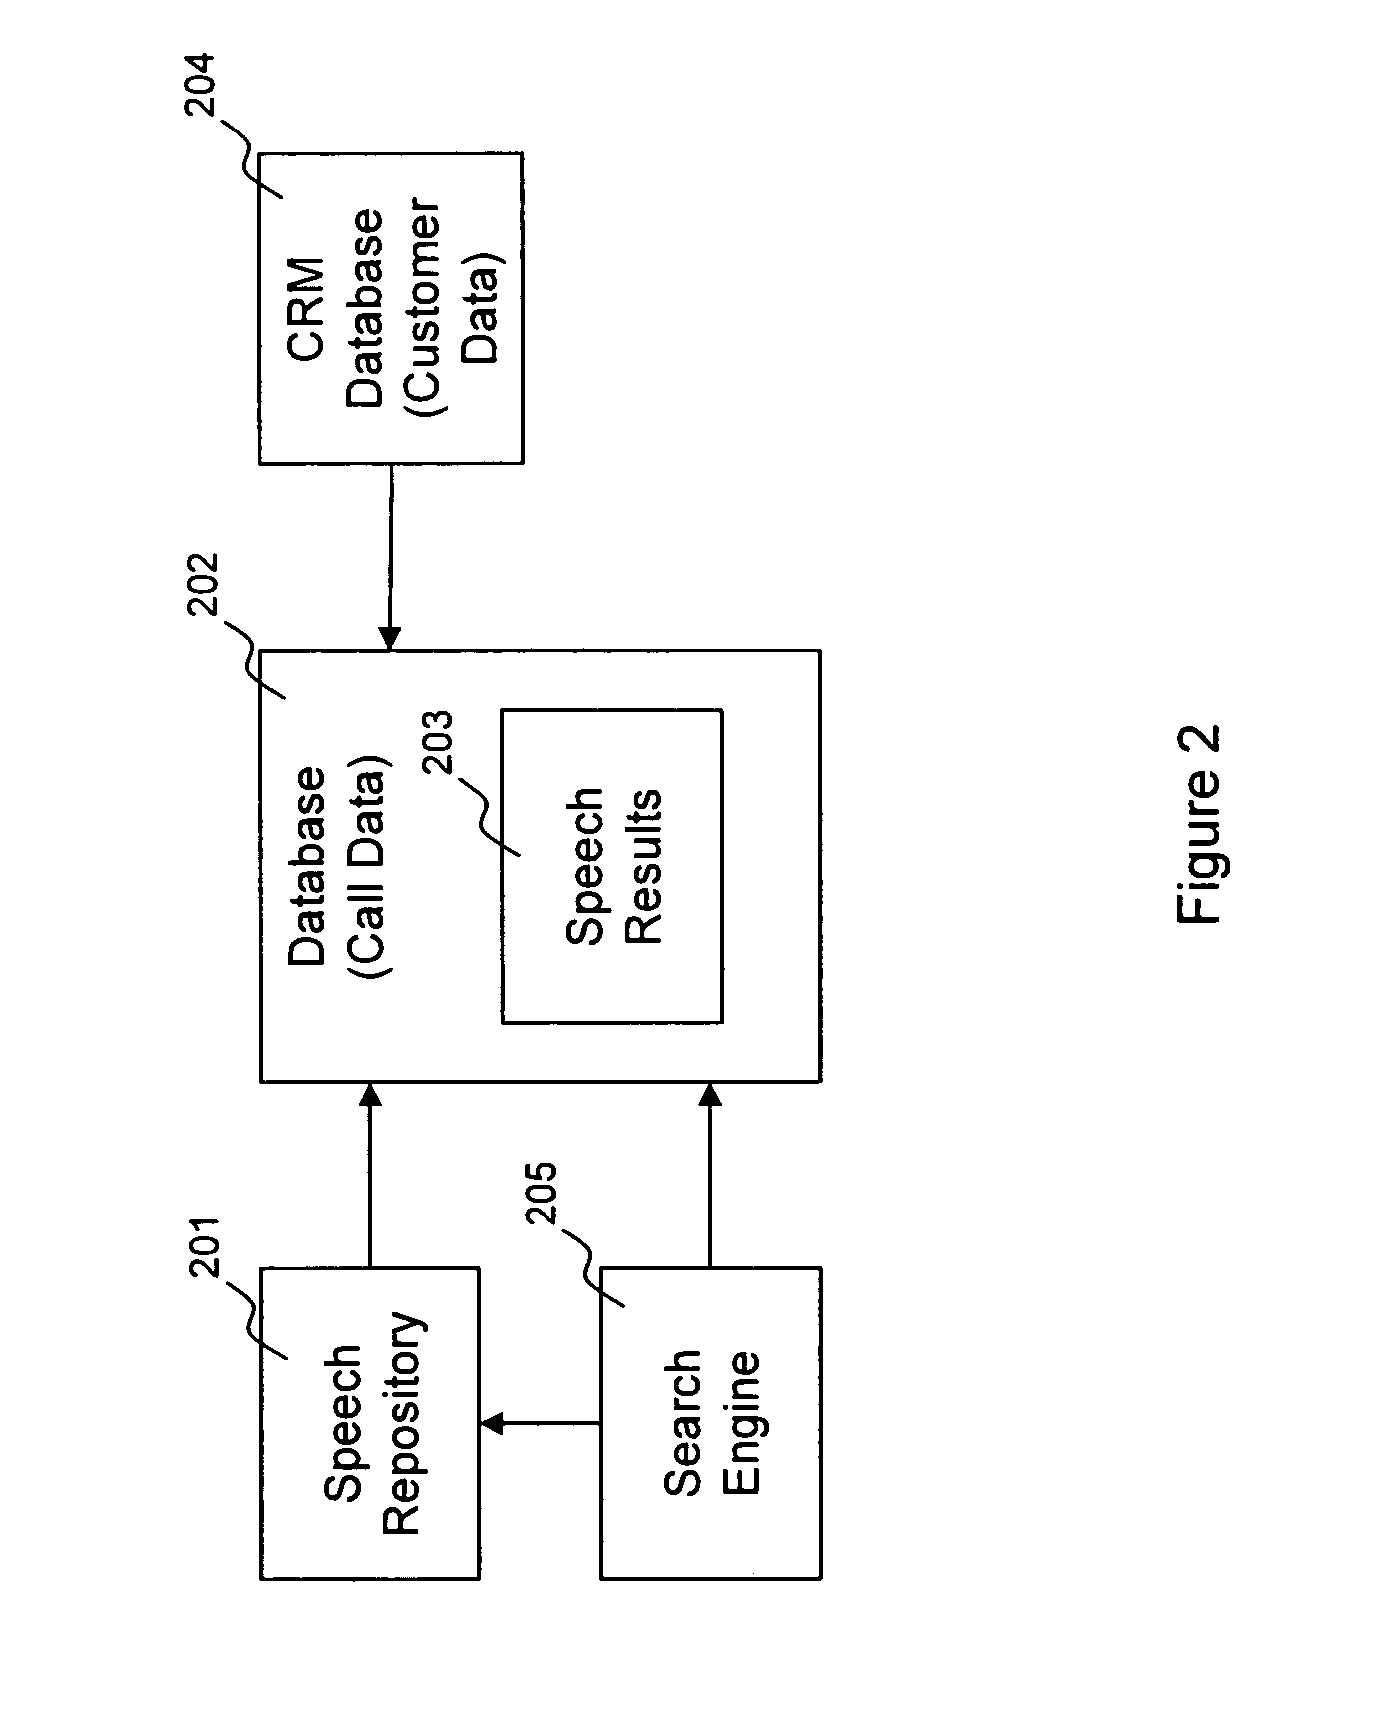 Methods and apparatus for audio data analysis and data mining using speech recognition